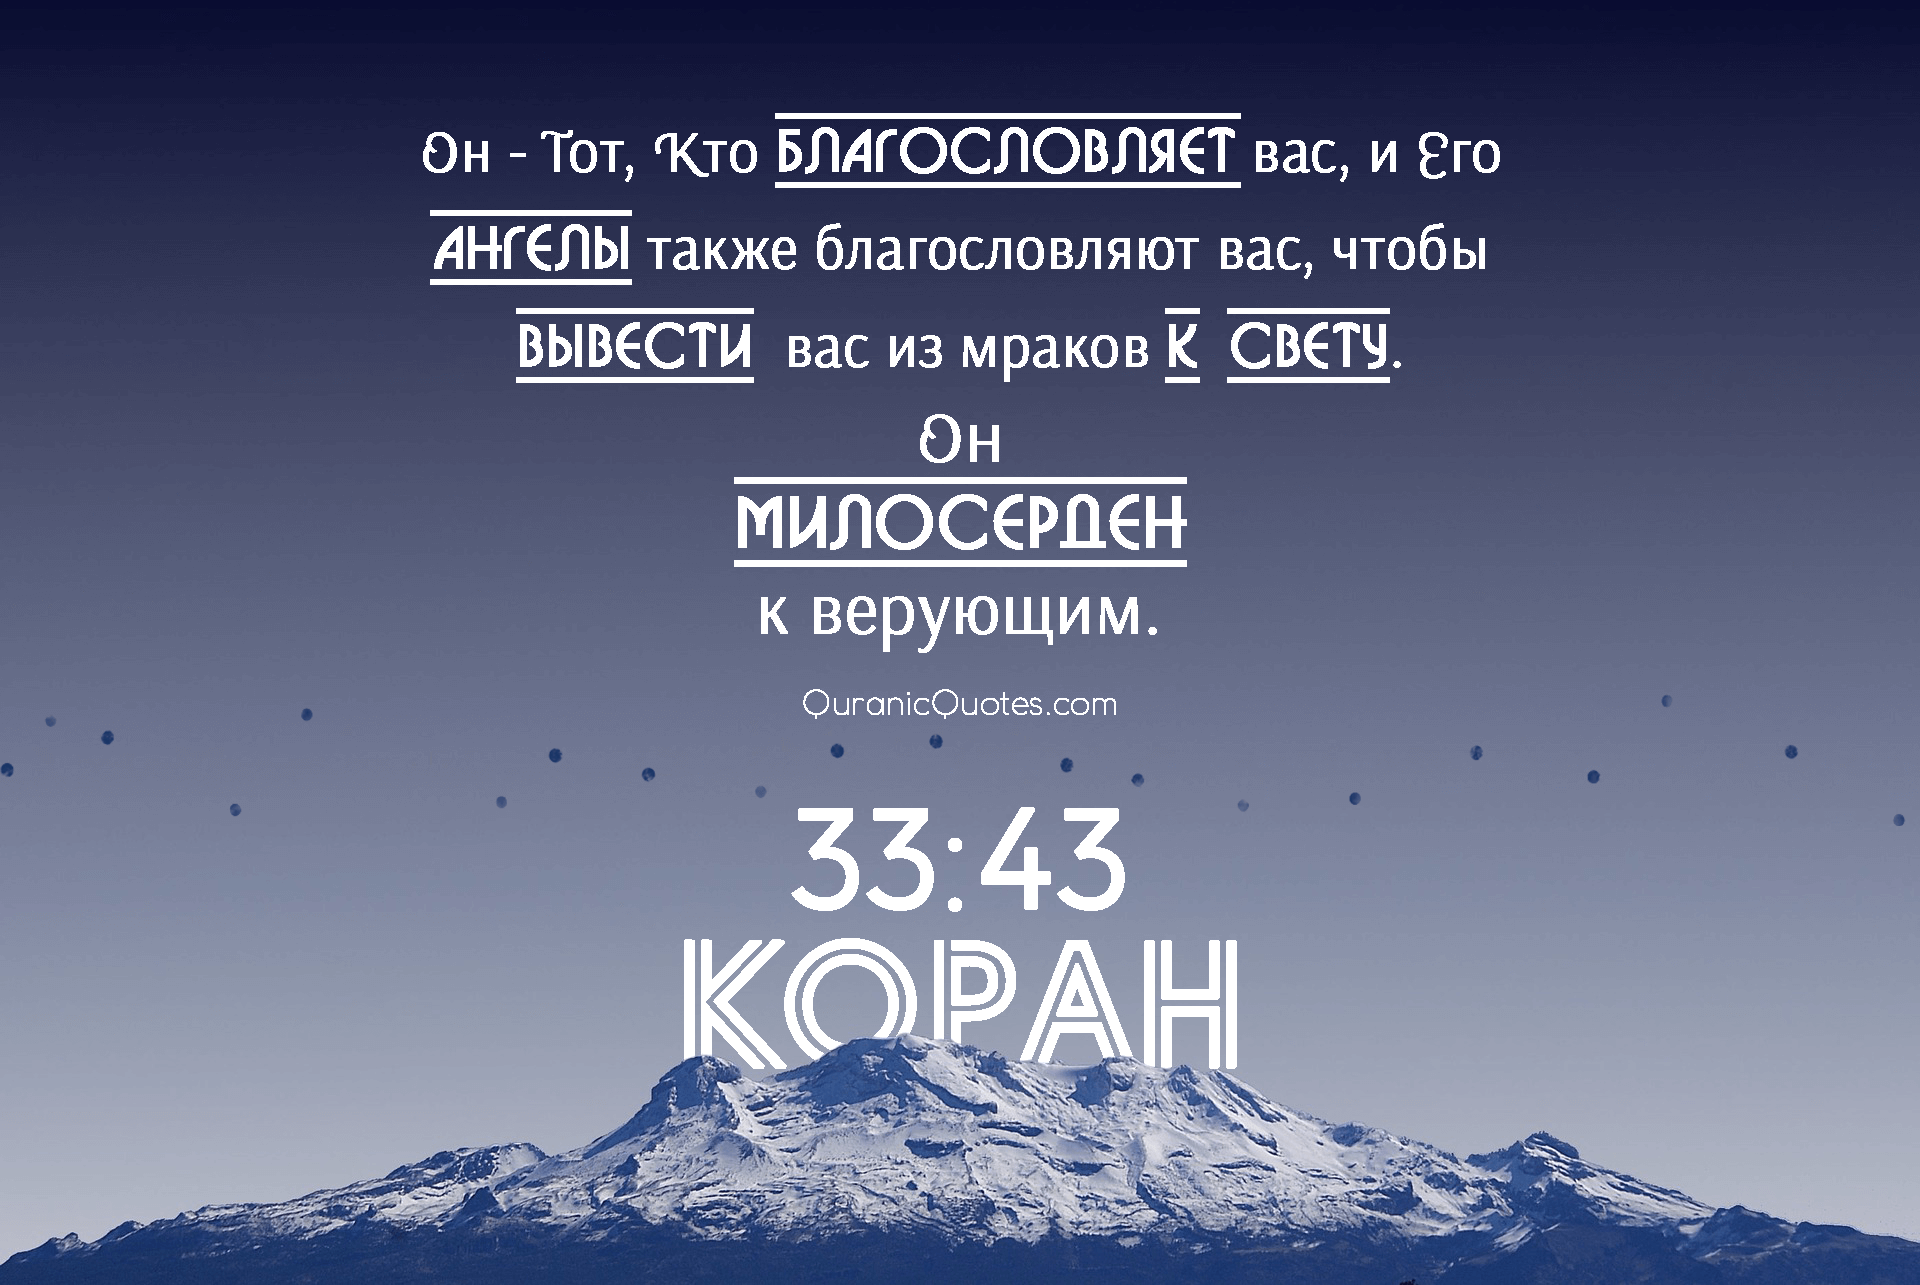 Quranic Quotes in Russian #29